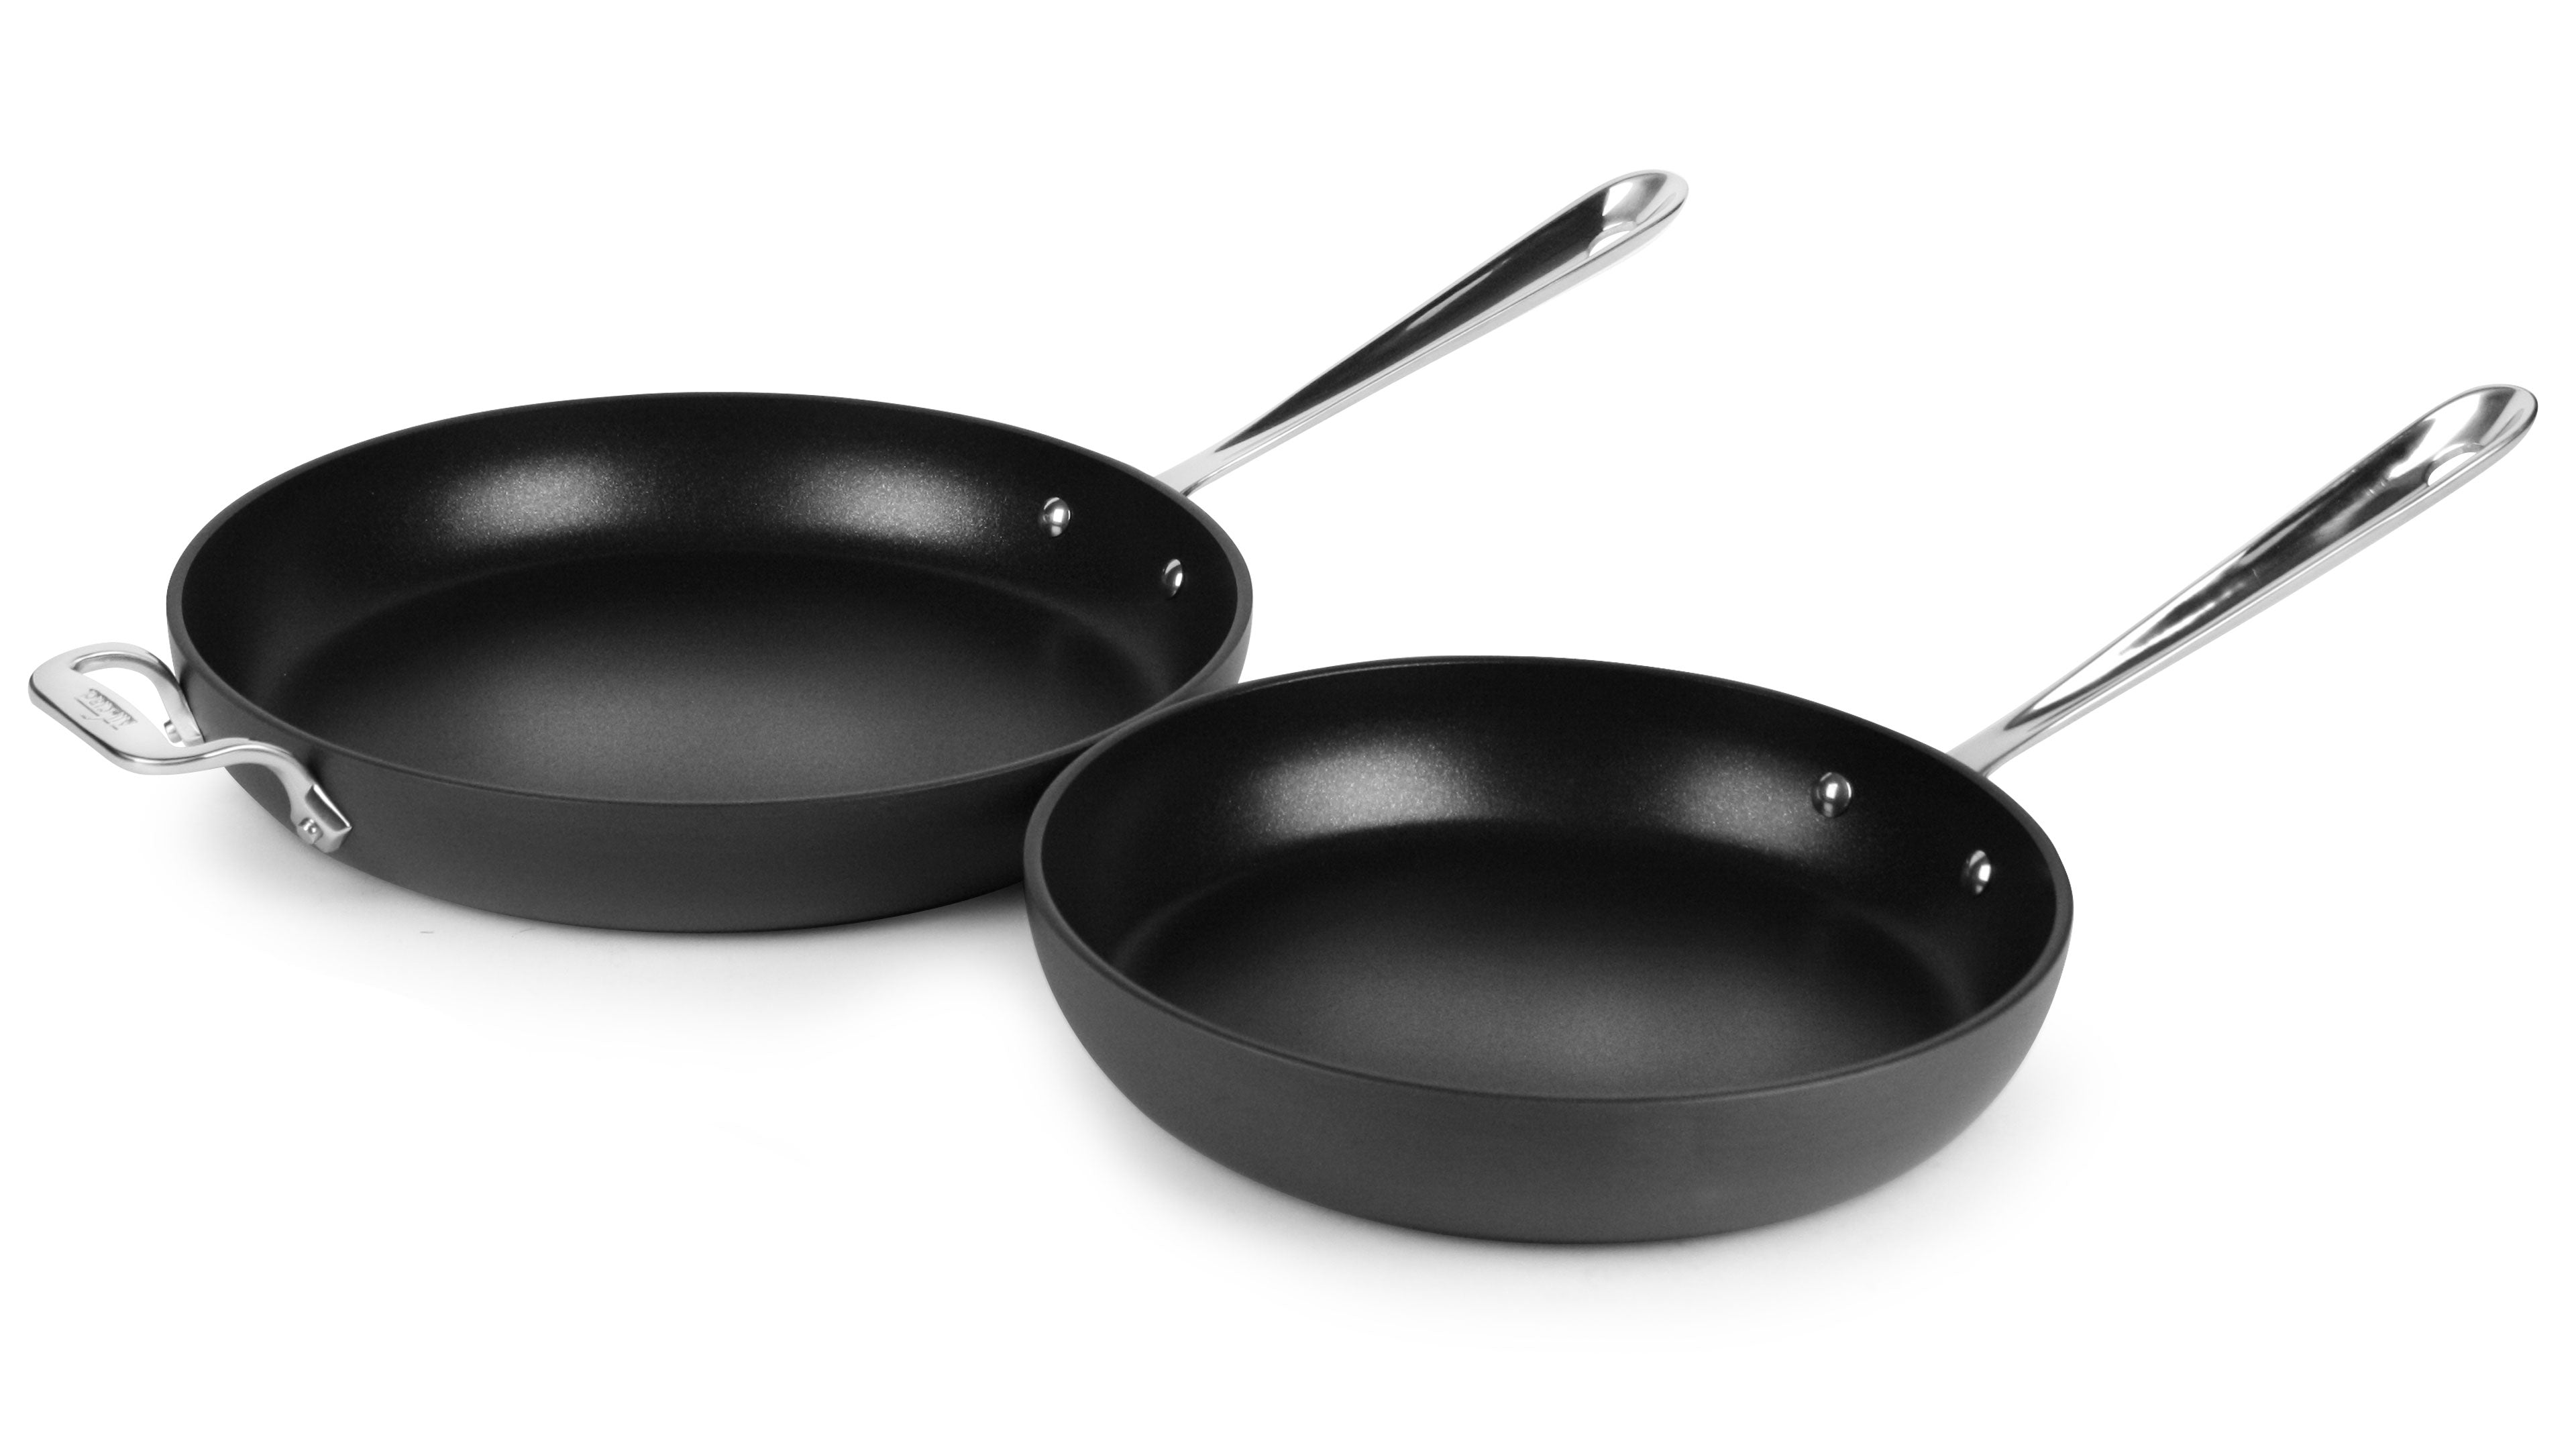 All-Clad HA1 2 Piece Hard Anodized Nonstick Fry Pan Set 8, 10 Inch